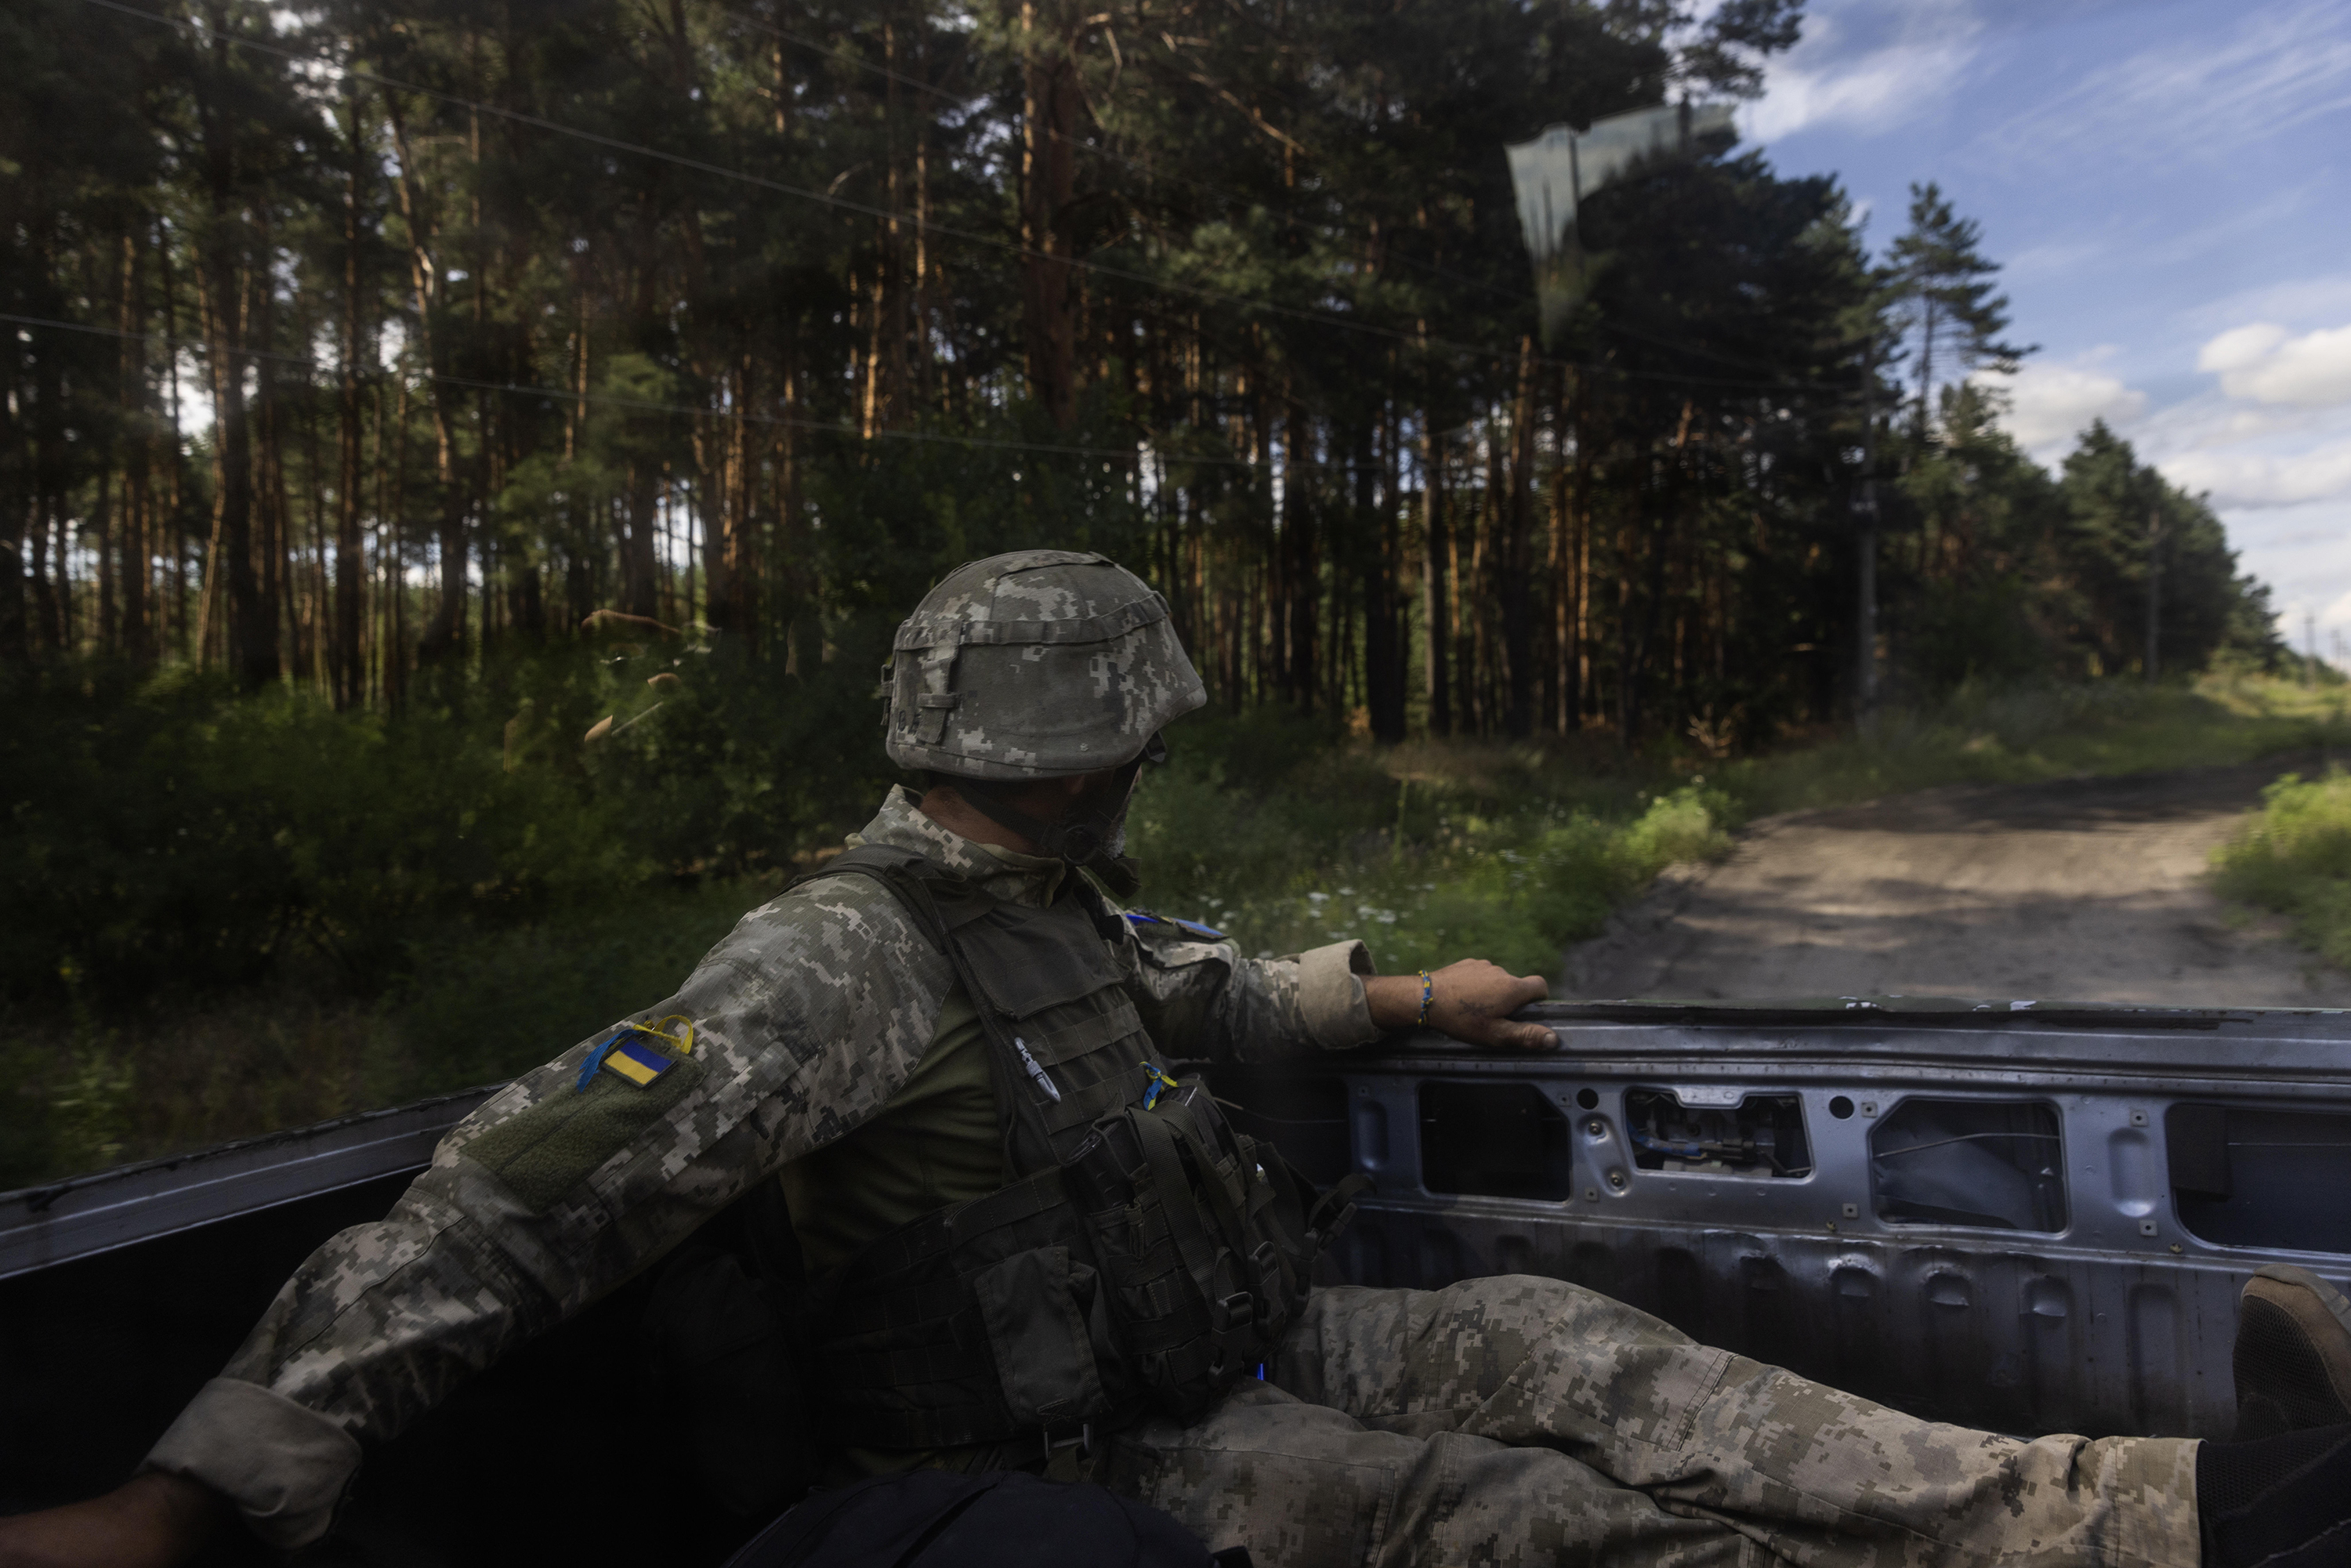 A Ukrainian infantry soldier catches a ride to a fighting position near Kupyansk, Ukraine, after being treated due to shrapnel wounding on the back during an attack, on July 12.